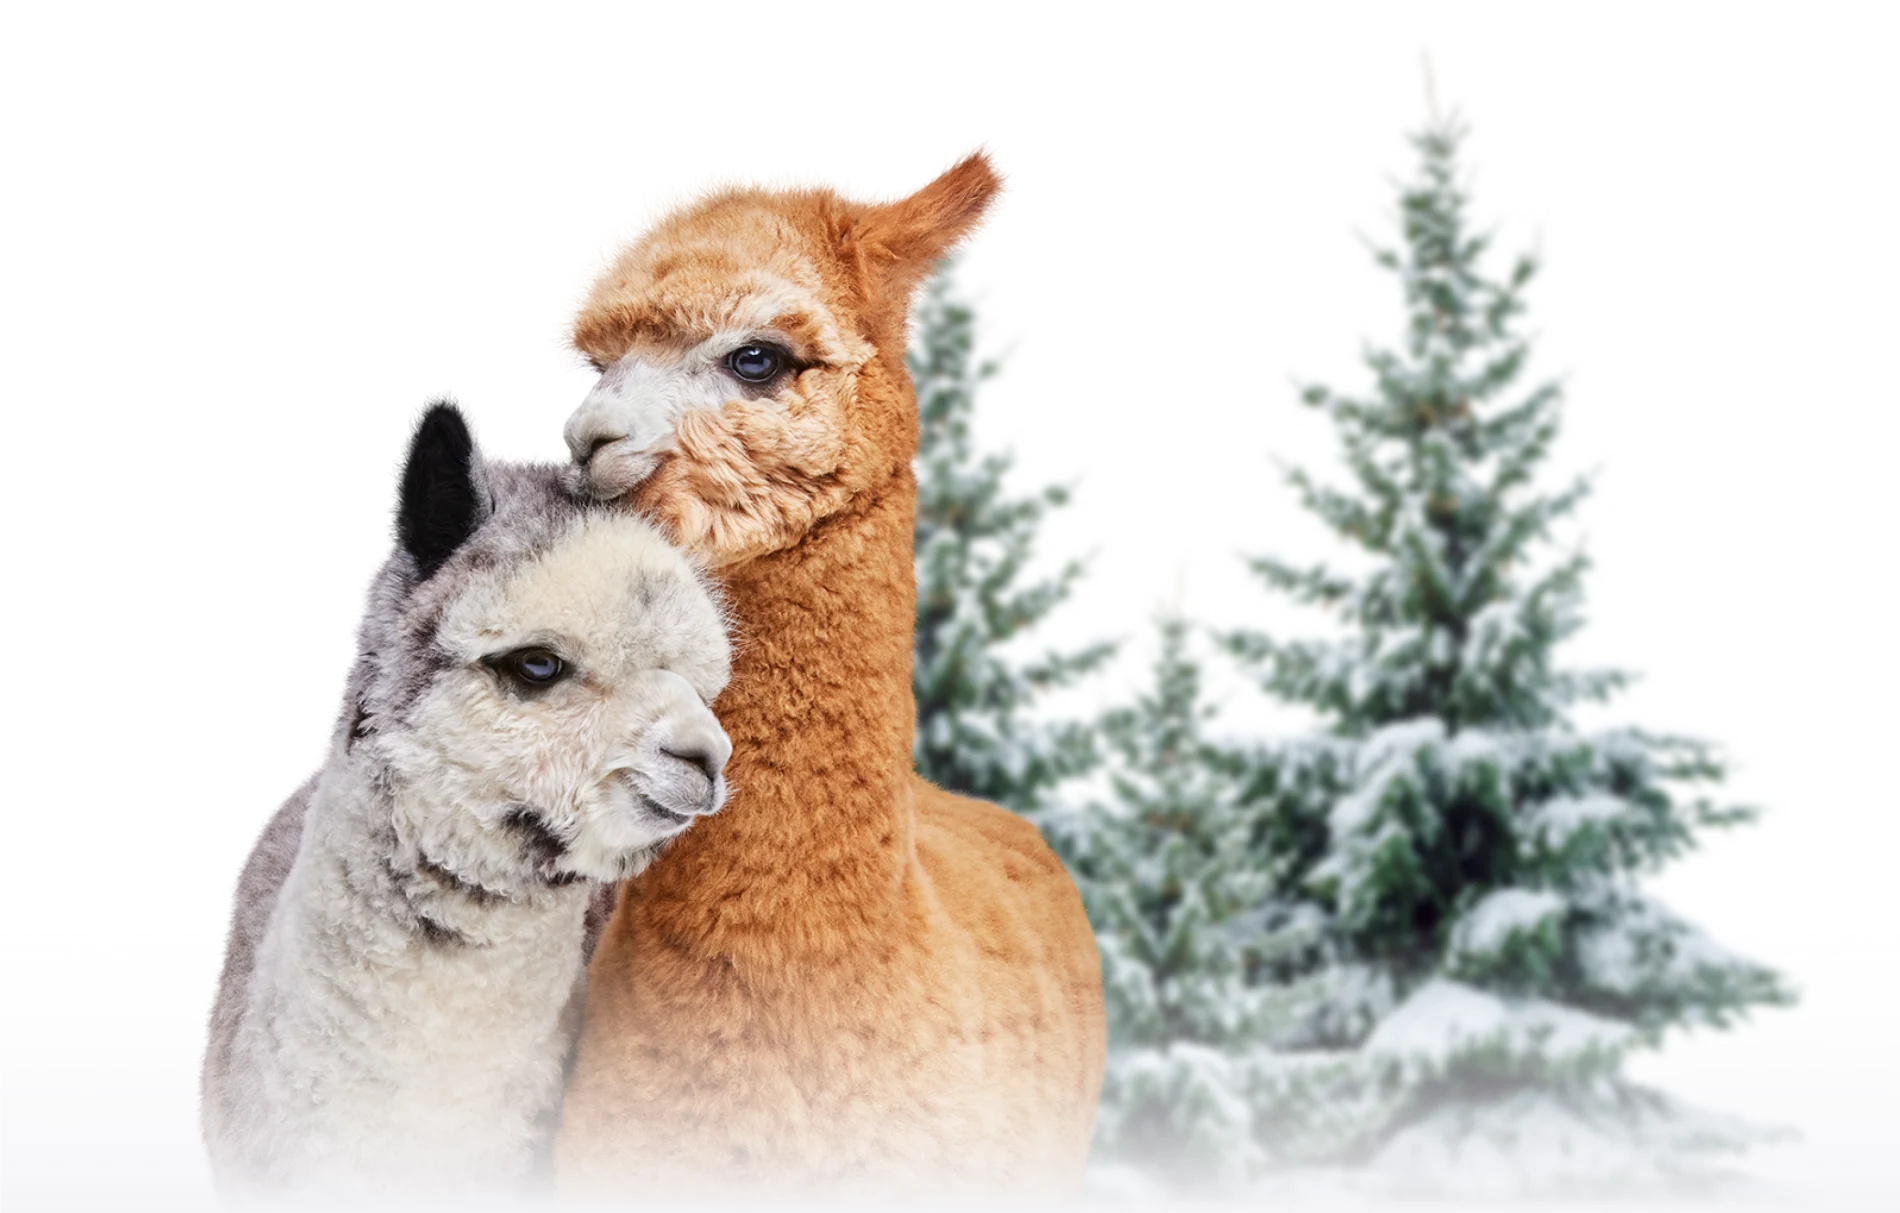 Two alpacas snuggling in front of snowy evergreens.